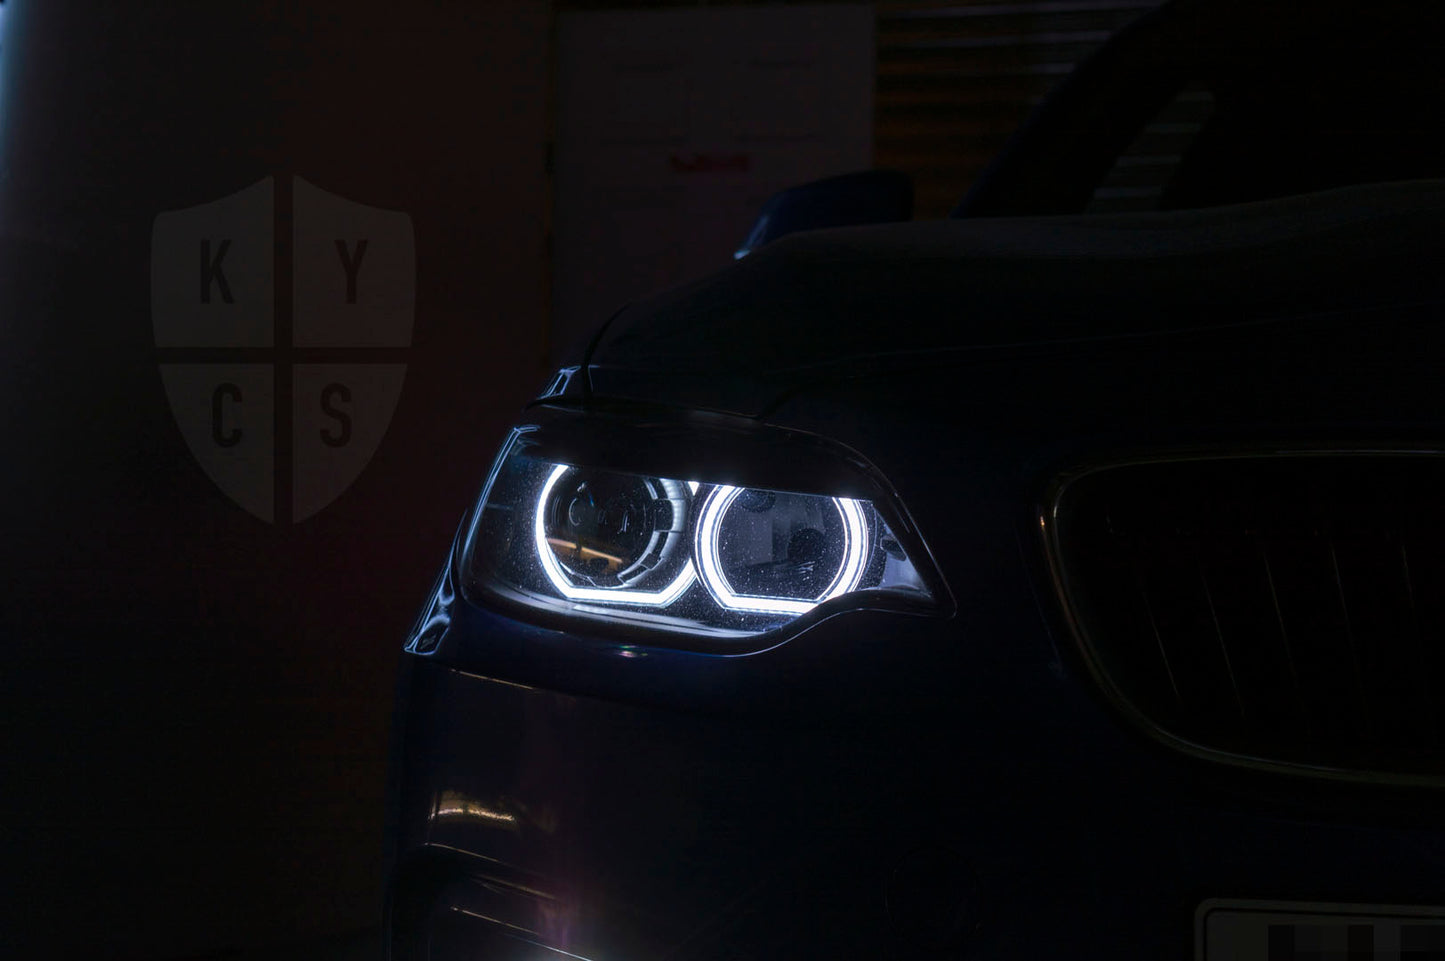 Headlight options on the above vehicle: KYCS (white) angel eyes | Classic blackout | Bi-LED 2.5" projector with LED bulb | Move high beam to low beam bi-LED projector | LED indicators